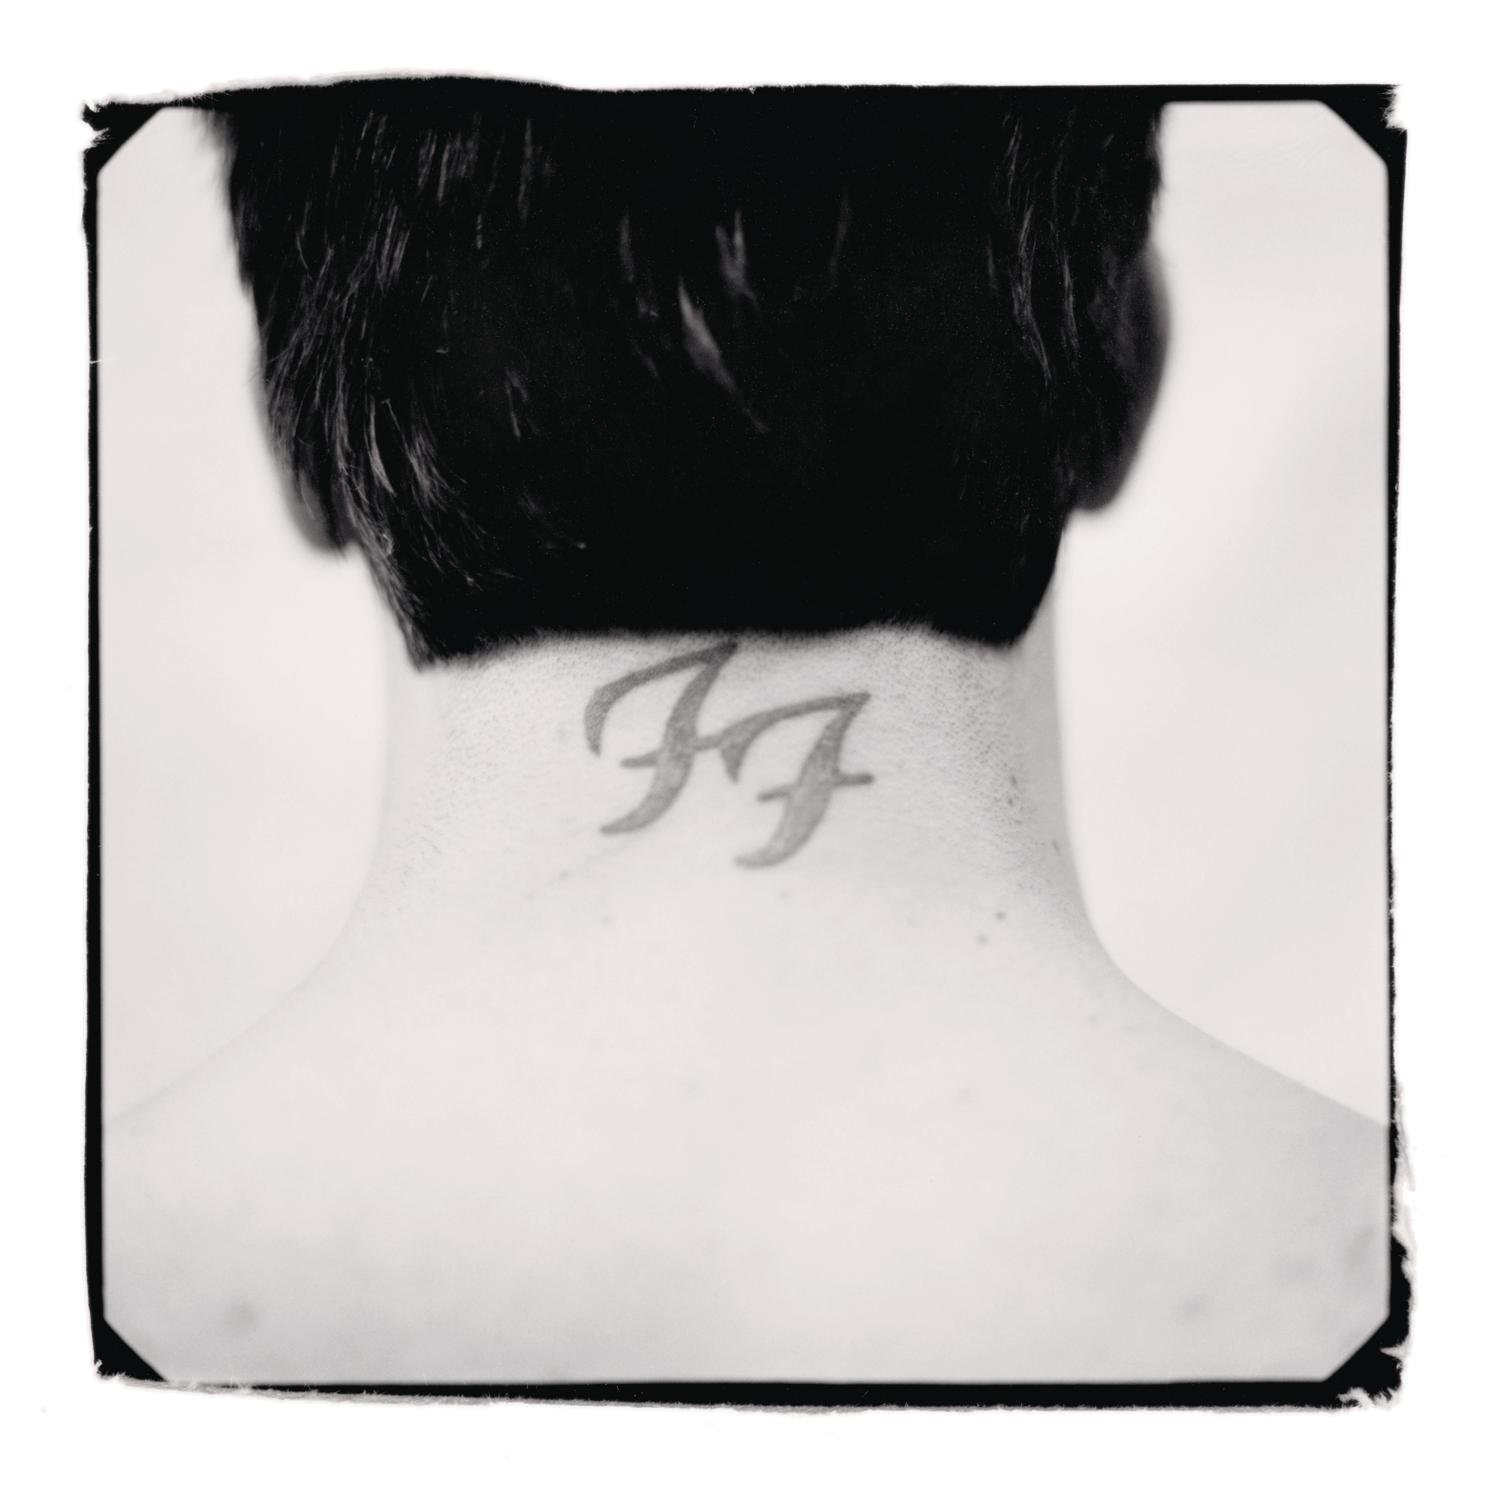 Vinylskiva Foo Fighters There is Nothing Left To Lose (2 LP)